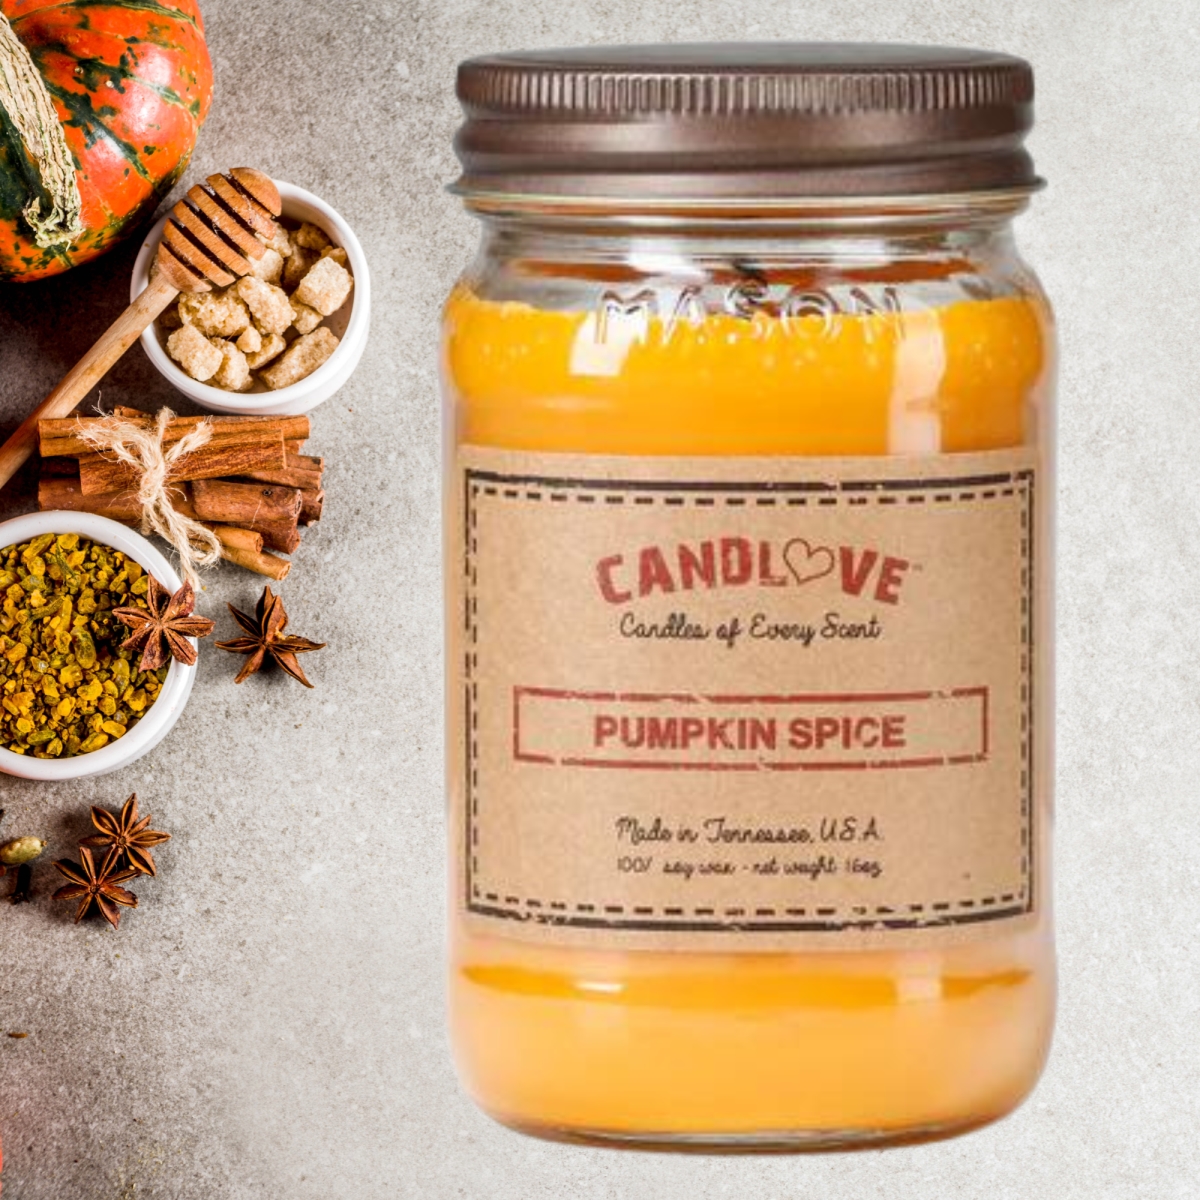 Picture of PPI SUPPLIES Pumpkin-C Candlove Pumpkin Spice Scented Candle - Non-Toxic 100% Soy Candle - Handmade & Hand Poured Long Burning Candle - Highly Scented All Natural Clean Burning Candle (16 OZ Mason Jar) Made in The USA